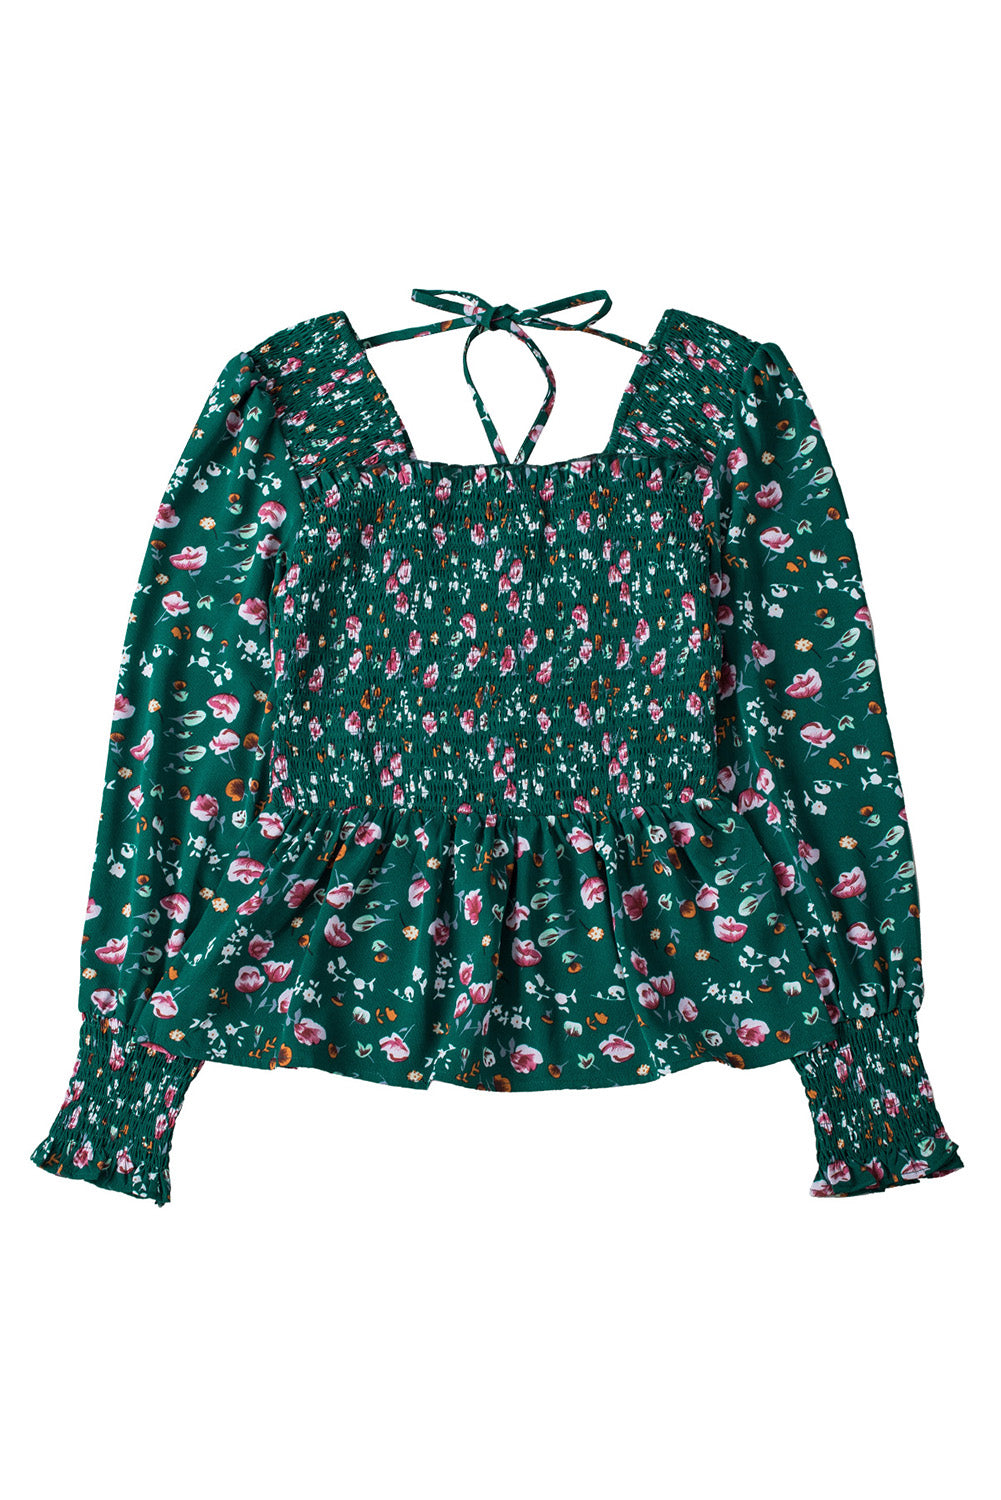 Floral Print Smocked Lace-Up Square Neck Long Sleeve Top